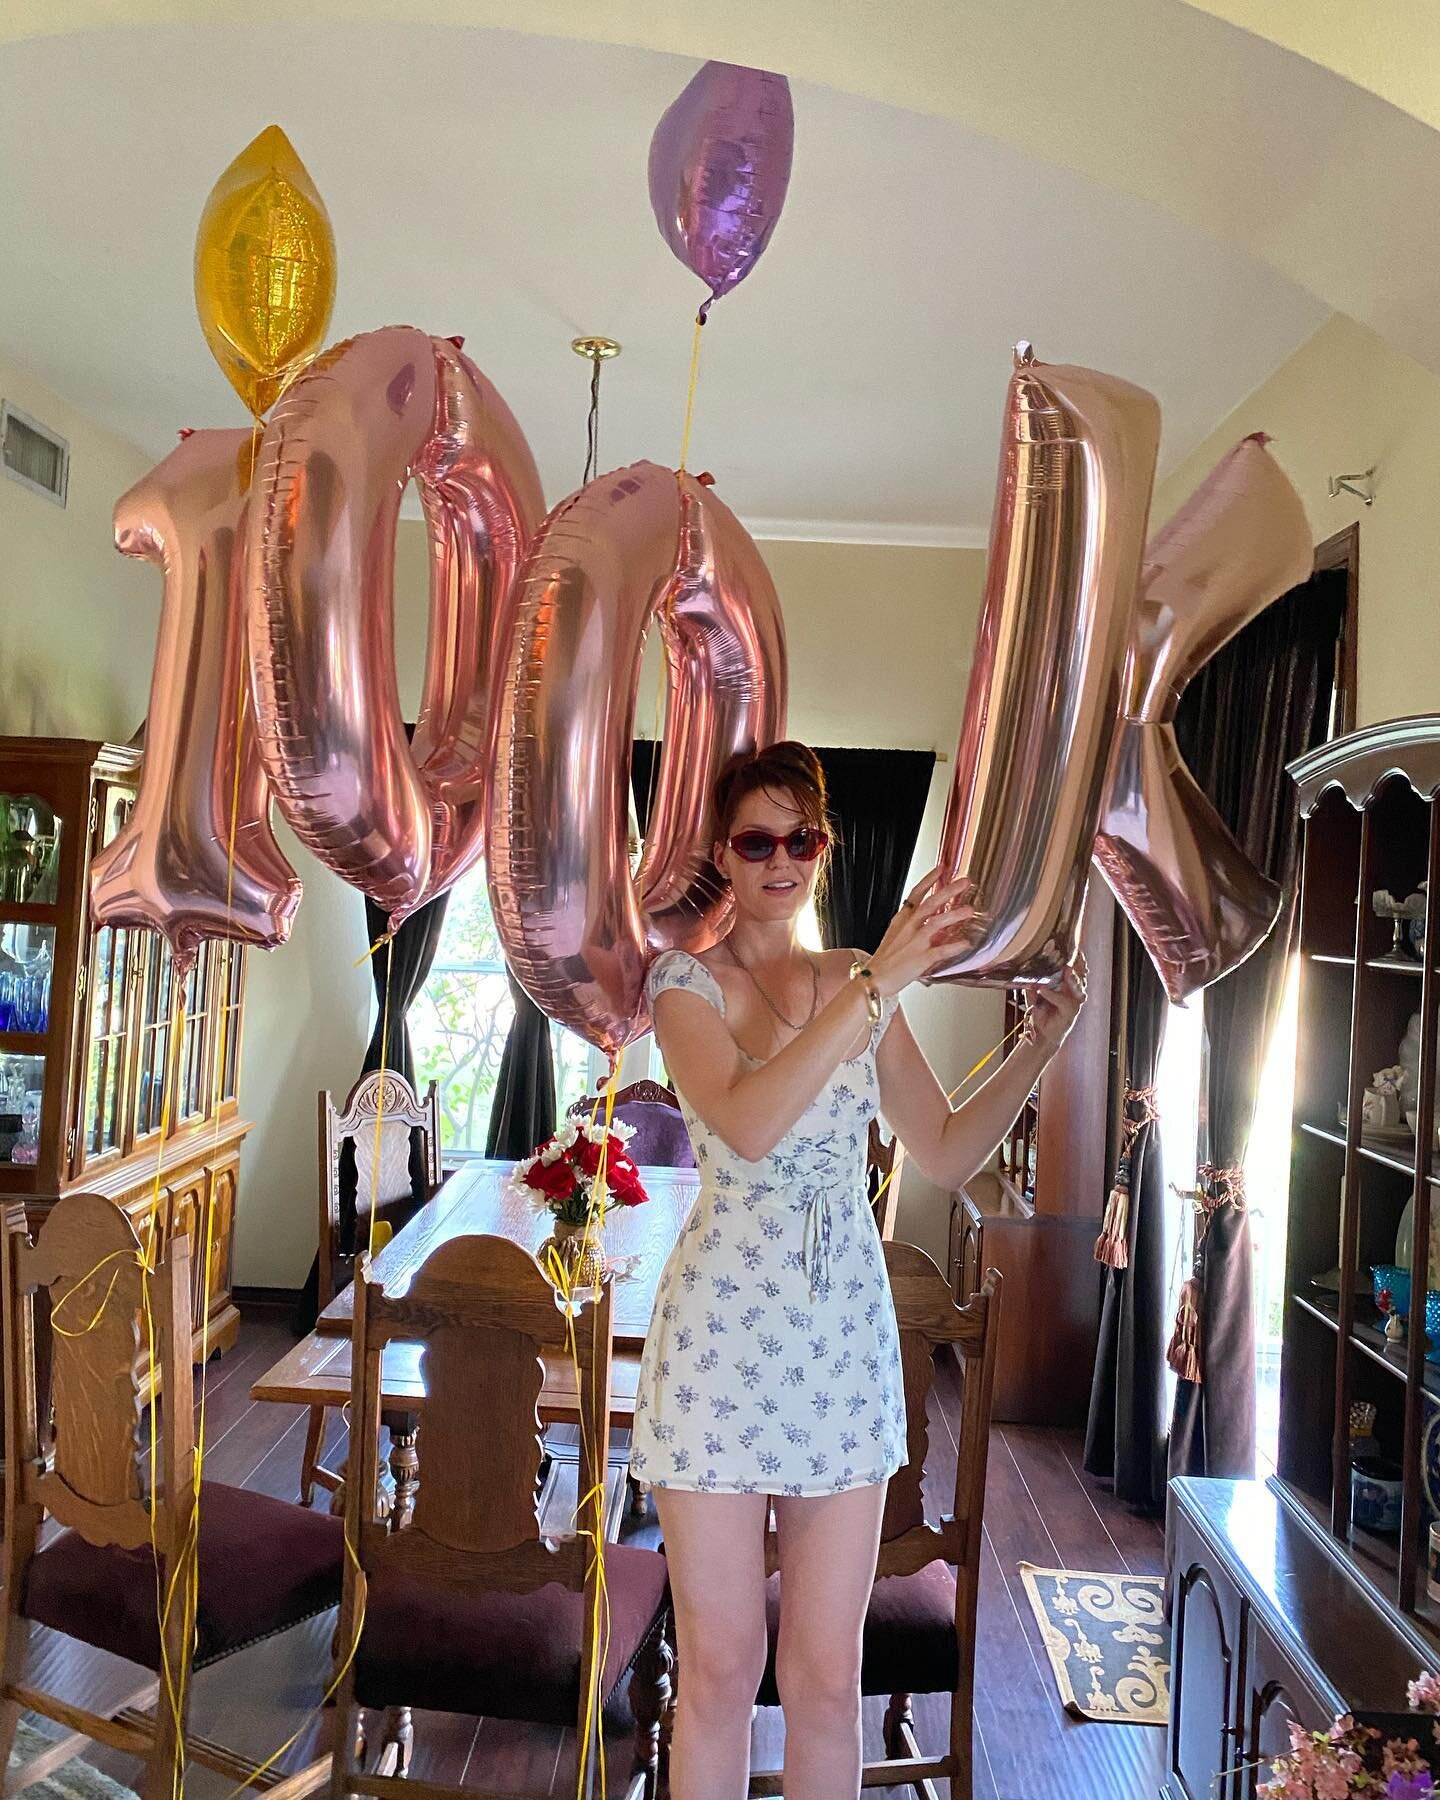 👀🍄 Well i wasn&rsquo;t expecting these ☁️ Thanks Mom! Super fun and nice surprise. @1_holdoutranch 💫🌙💝 100k streams on Spotify 🥳